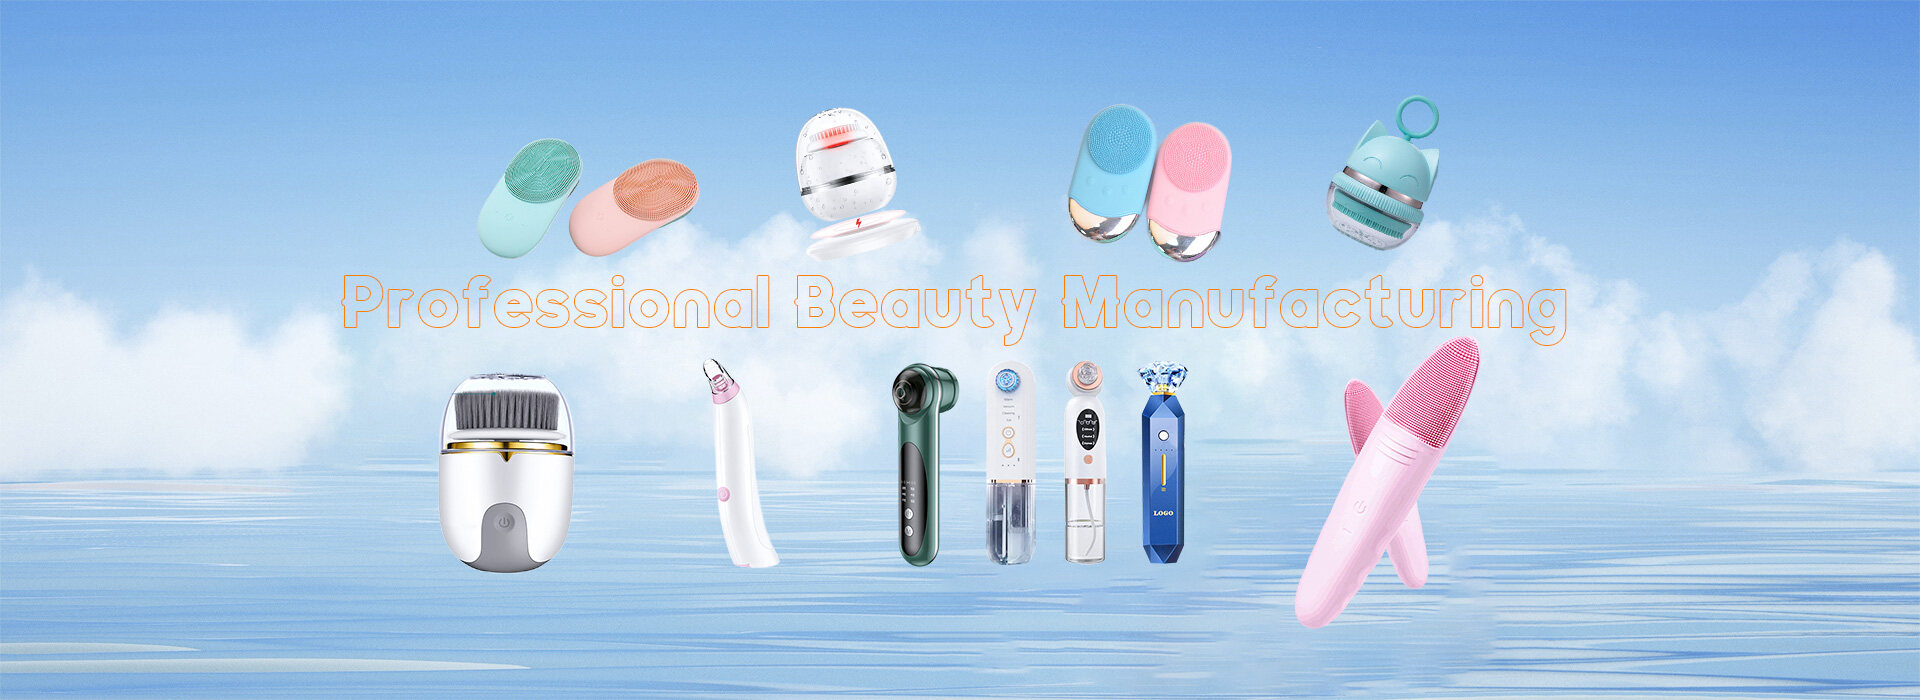 Electric Mini Portable Foldable Kneading Vibrating Relaxing Eye Care Smart Eye Massager Machine With Heat Compression,Red Led Light Therapy Wand Microcurrent Hot Compress Led Facial Skincare Wand,Face Massager Skin Tightening Face Lift Eye Anti-wrinkle Eye Massager Cream Tube with Roller Applicator,Best Selling Products 2023 Popular Skin Care Eye Massager Device Led Eye Antiwrinkle Dark Circles Remover Massager Pen,Top Fashion Multifunction Eye Massager Intelligent Eye Care RF Massager Wand Heating Anti-Wrinkle Eye Massage Pen